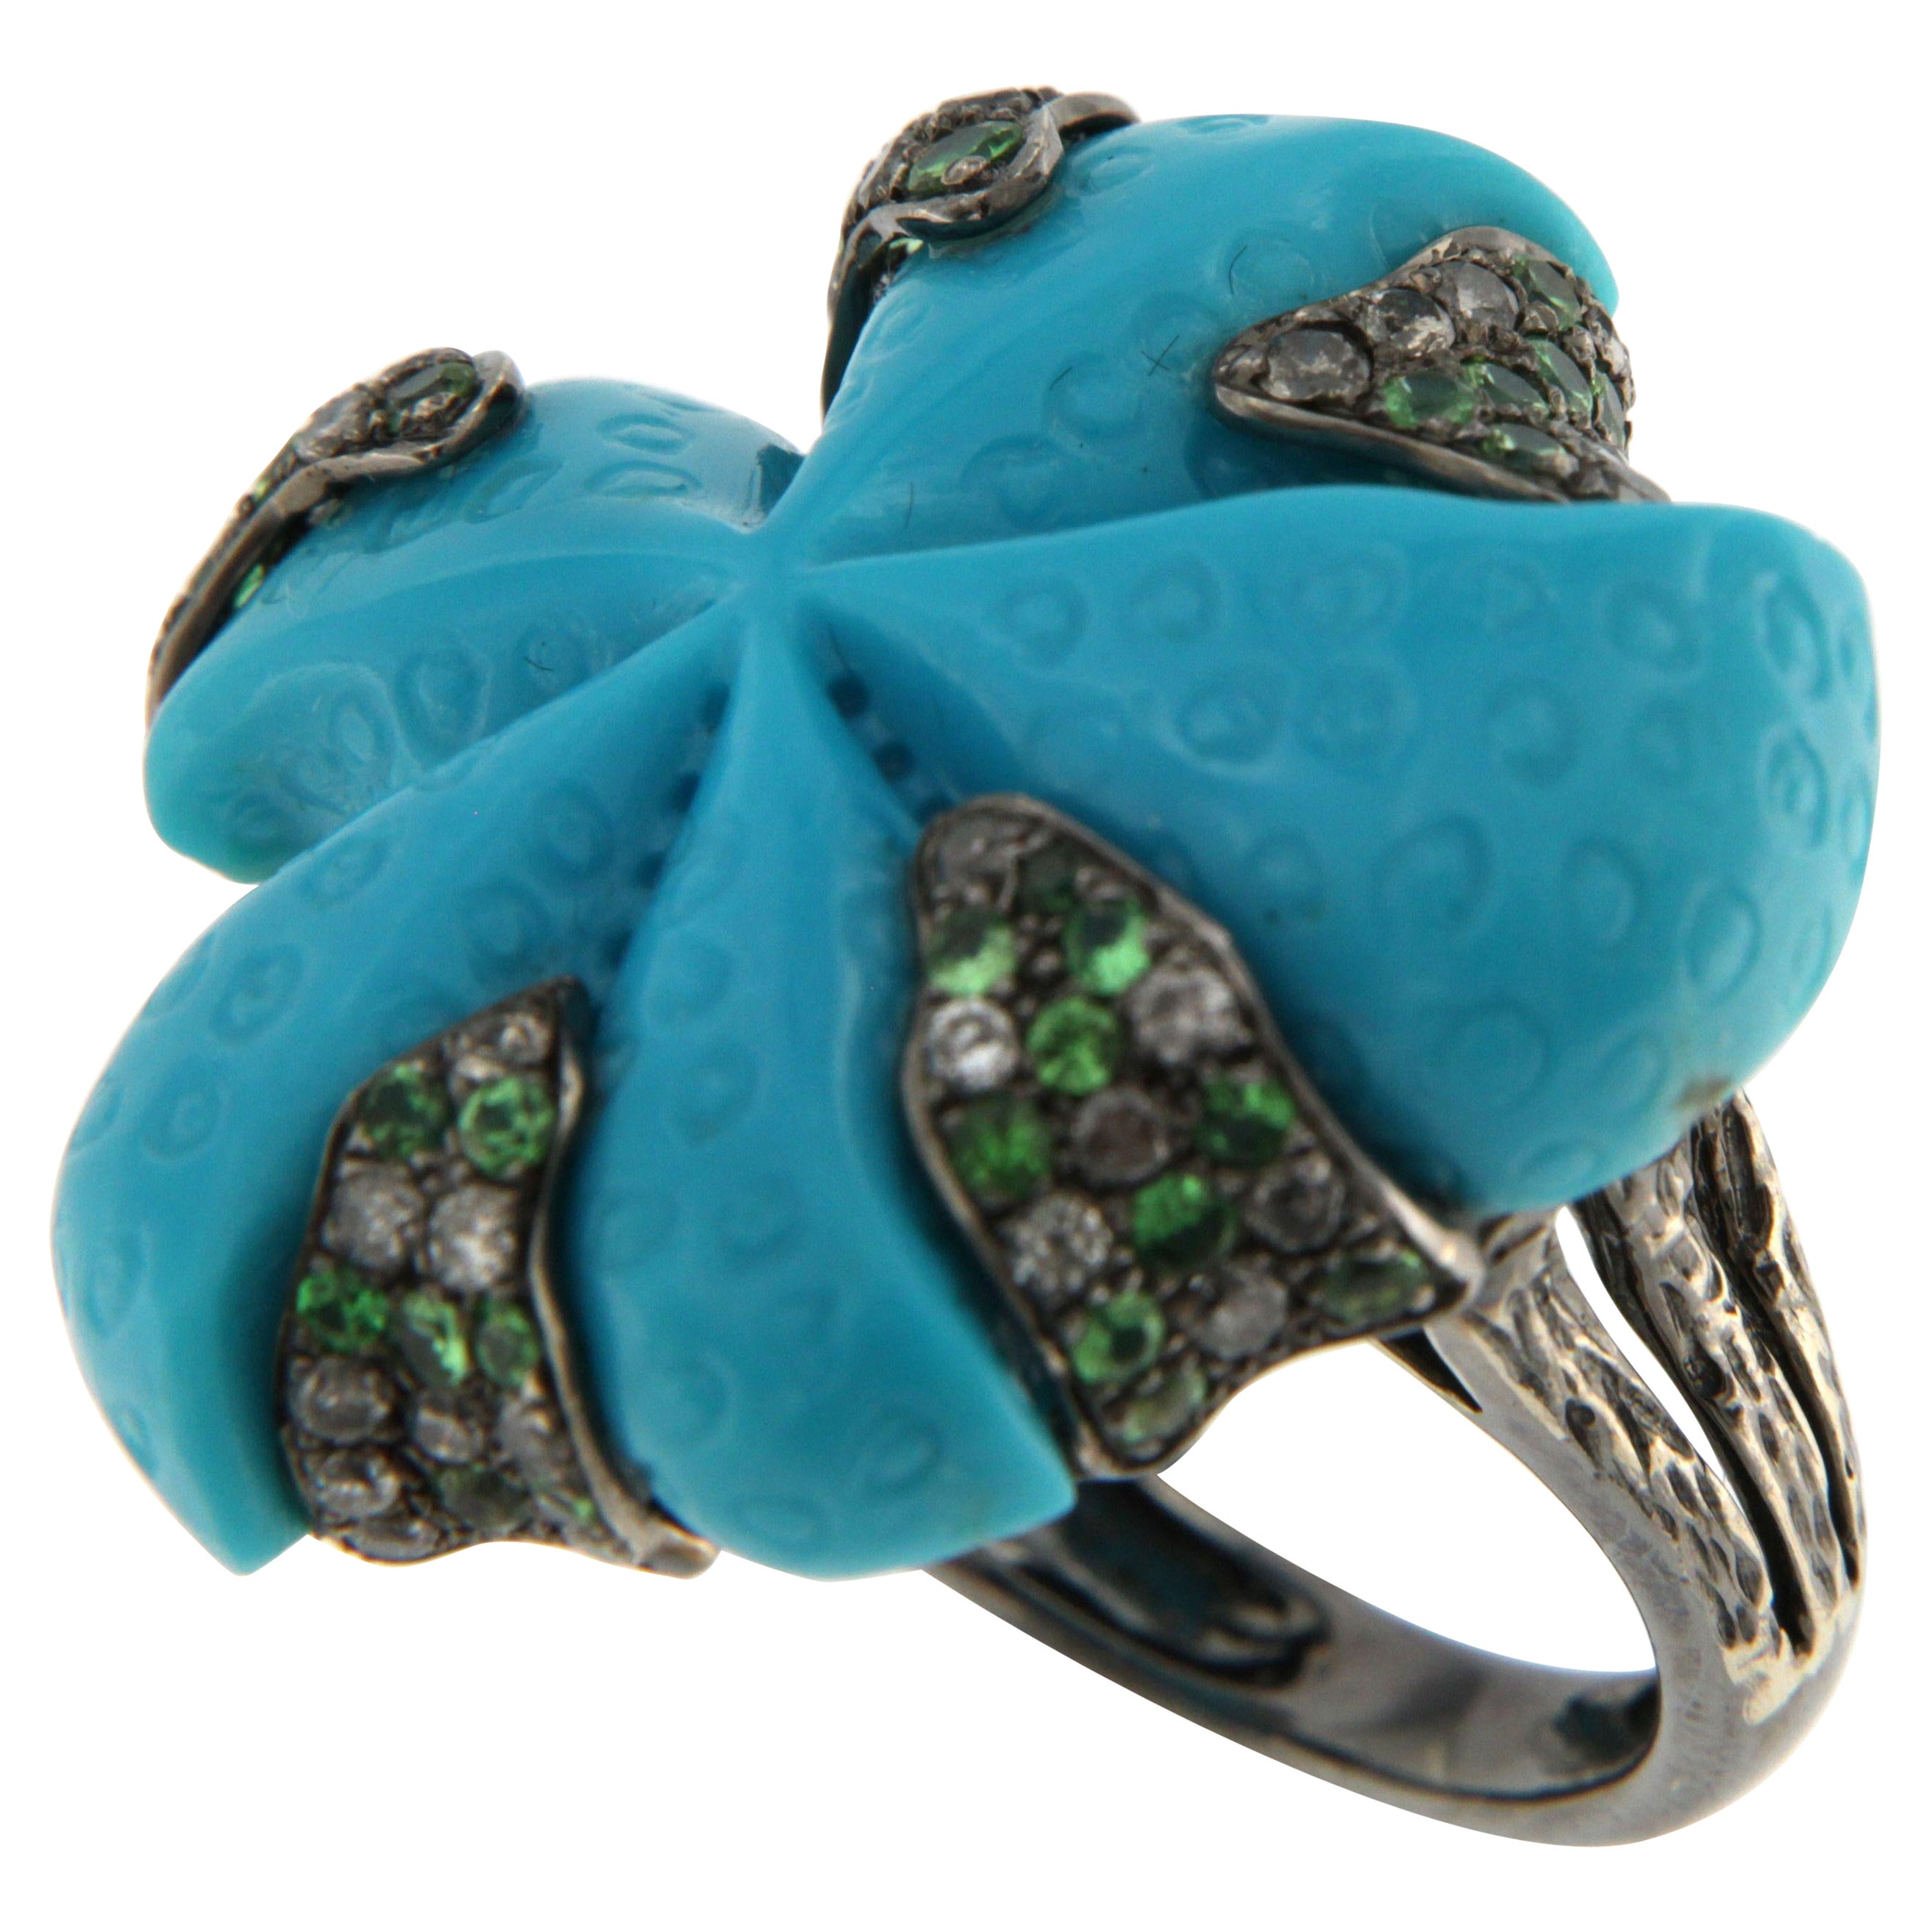 Vintage 37Ct Turquoise Green Garnet and Diamond Cocktail Ring in 14K White Gold